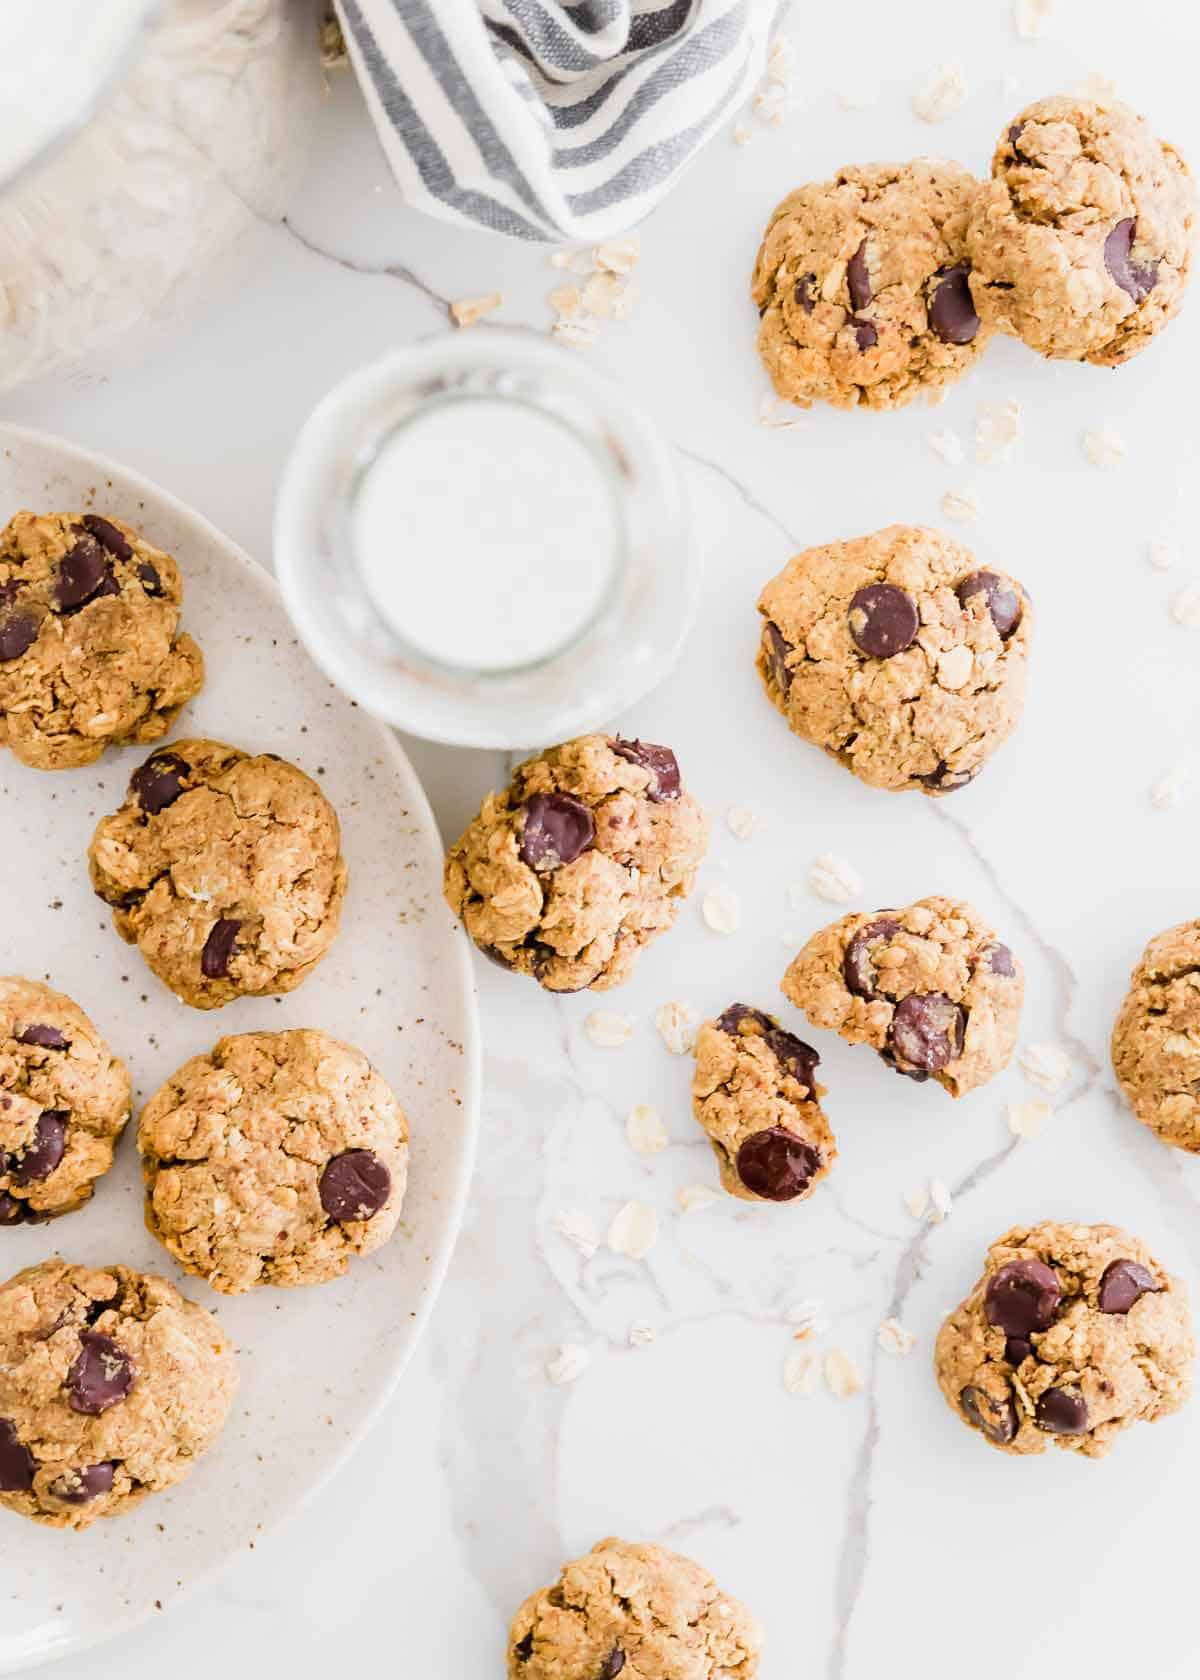 Easy oatmeal chocolate chip cookies that are vegan and gluten-free.